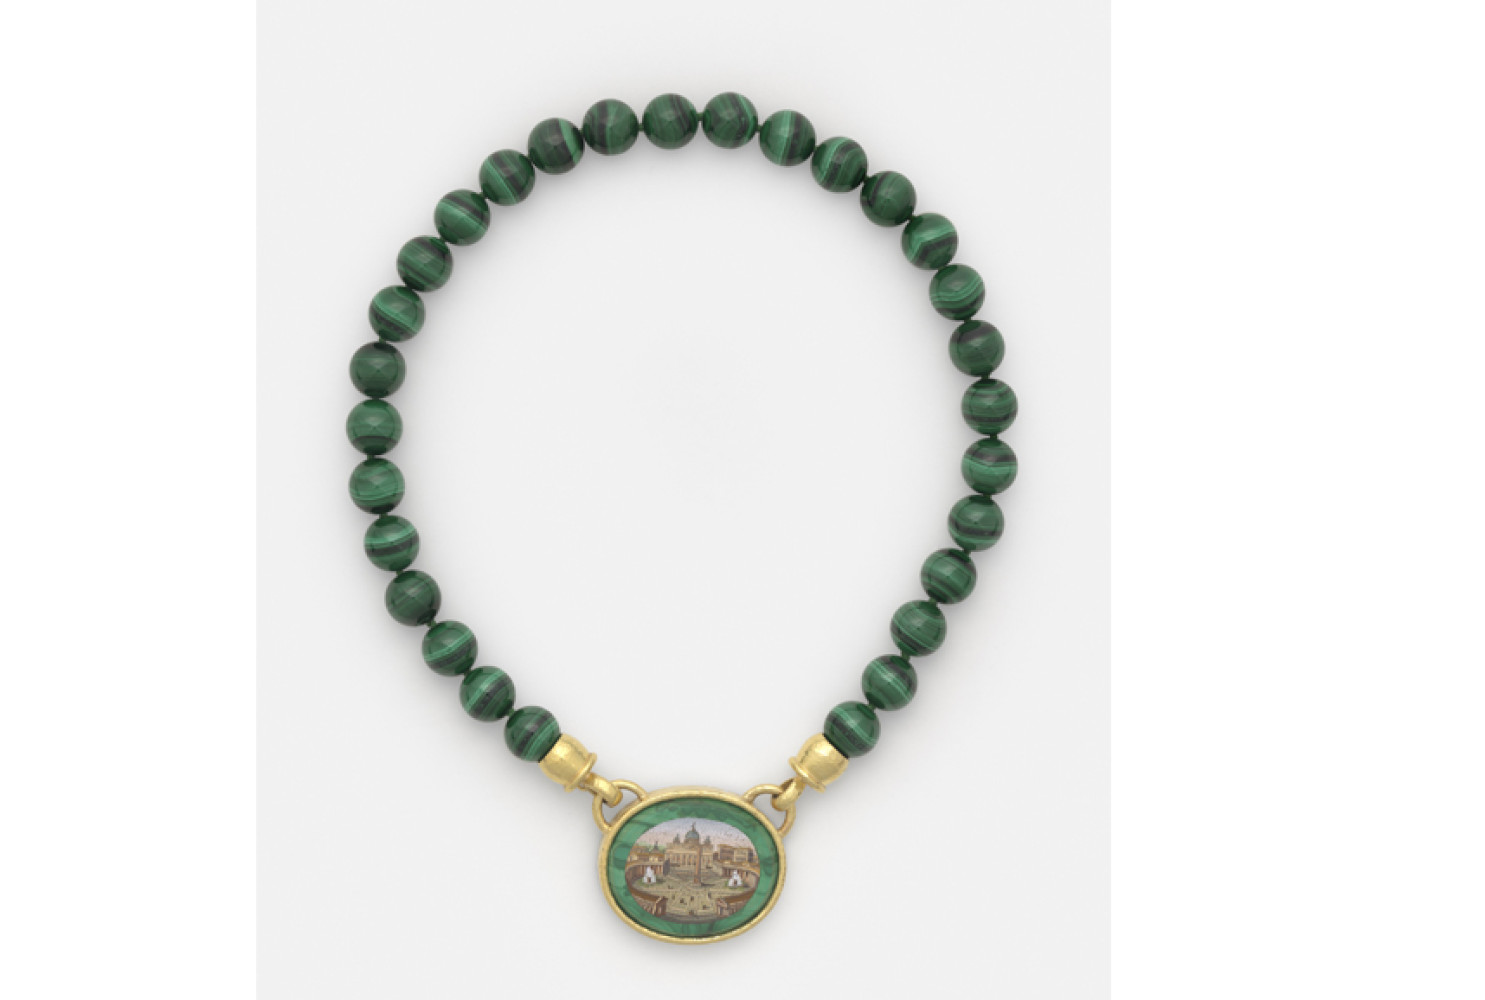 St. Peter's Square, Rome, 19th century; Micromosaic set in gold as a pendant, with malachite border, suspended on 12-mm malachite bead necklace, 17 in.; 33 x 40 mm. Collection of Elizabeth Locke; Photo: Travis Fullerton; © Virginia Museum of Fine Arts
